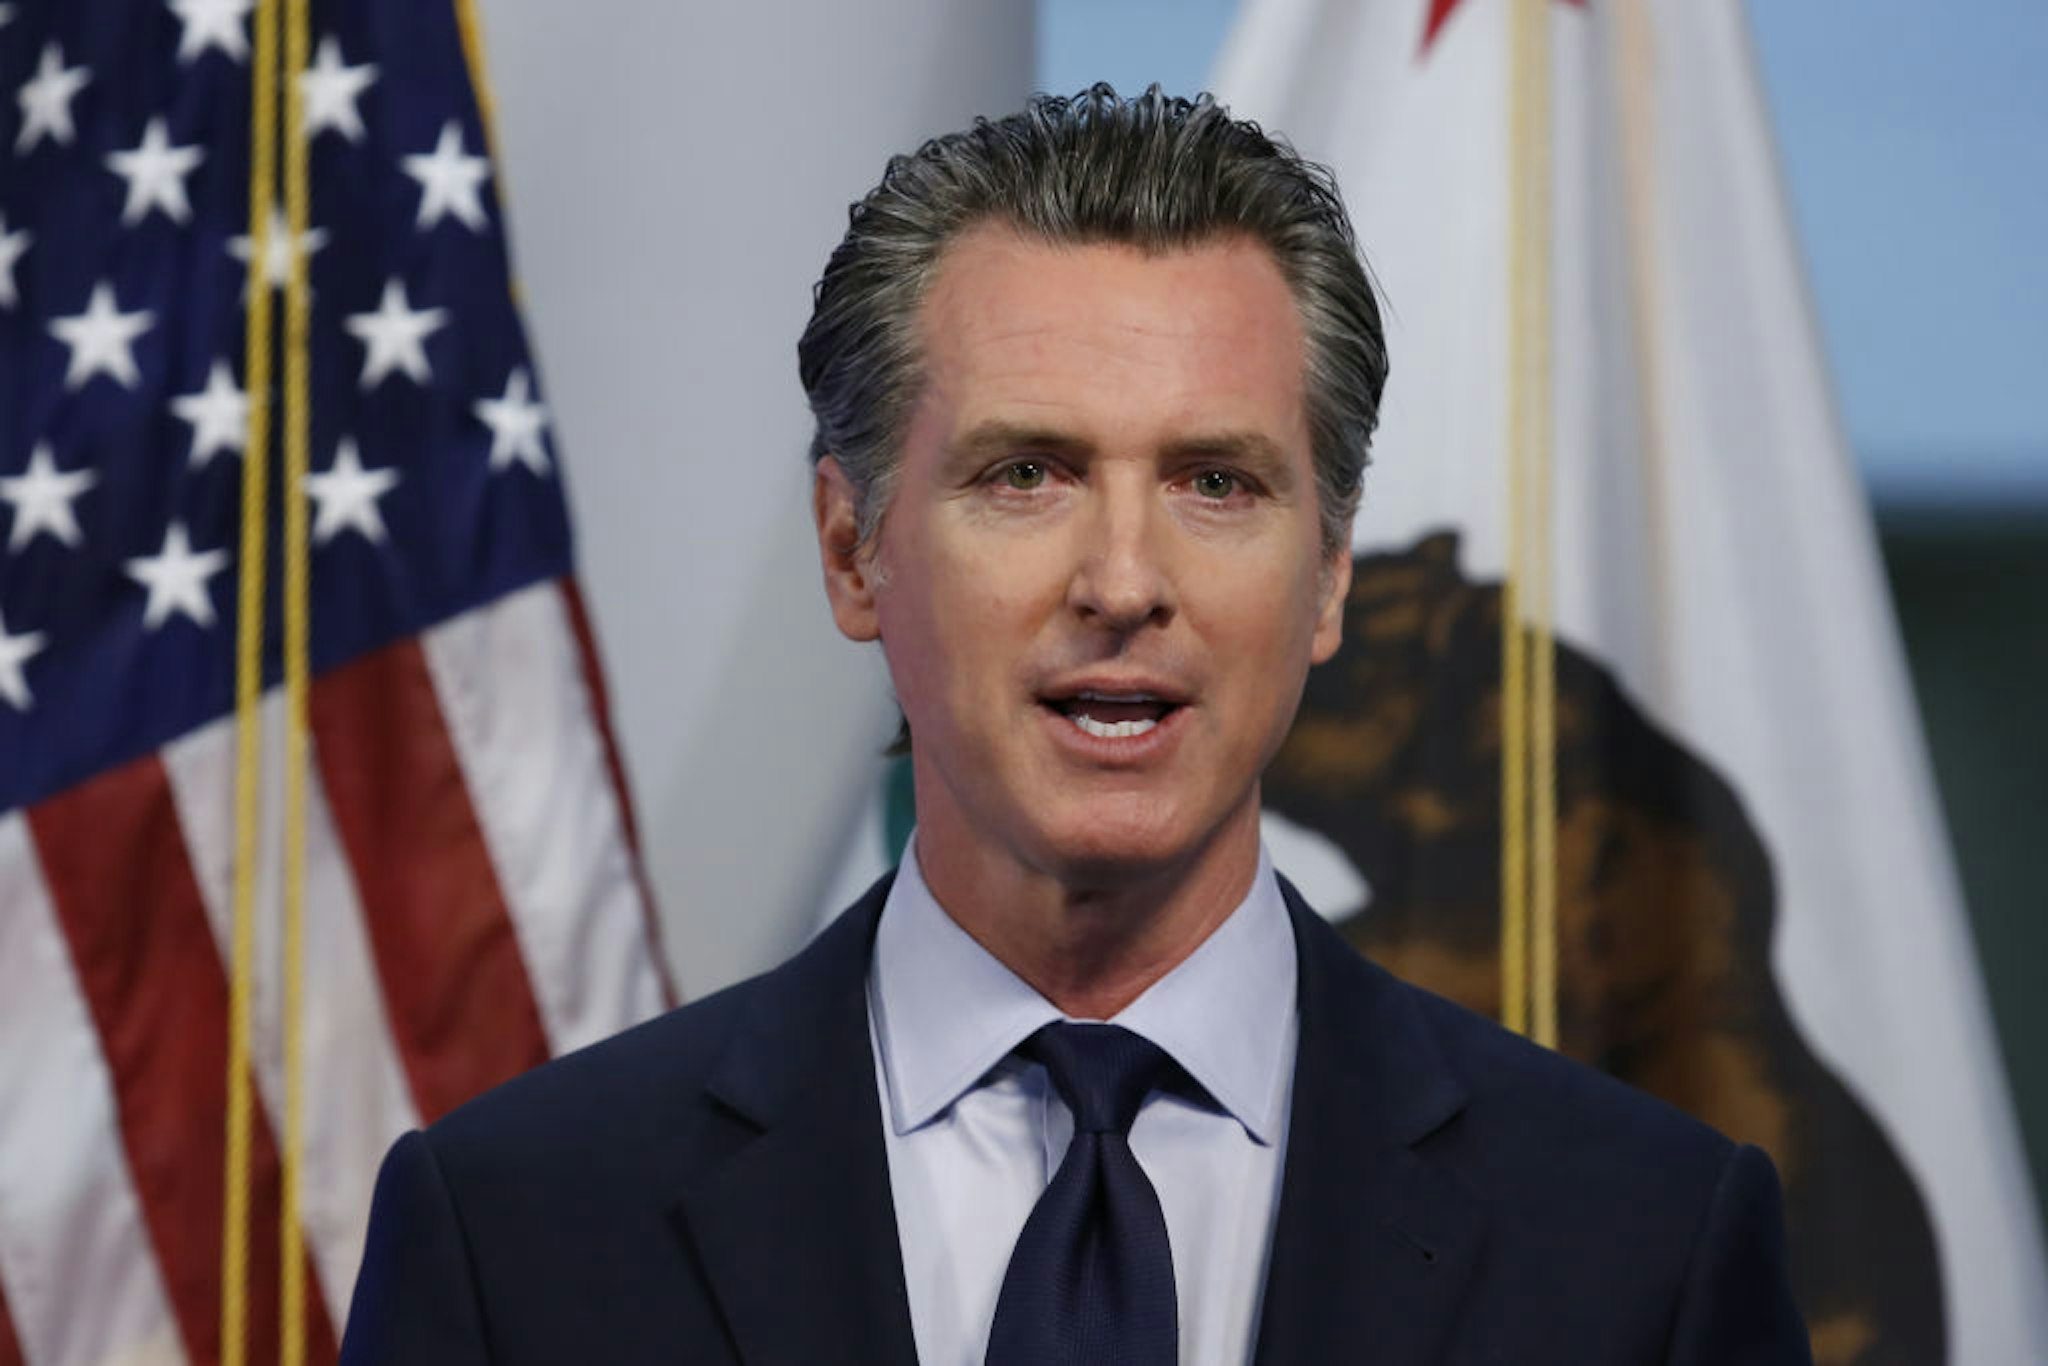 Gavin Newsom, governor of California, speaks during a news conference in Sacramento, California, U.S., on Tuesday, April 14, 2020.